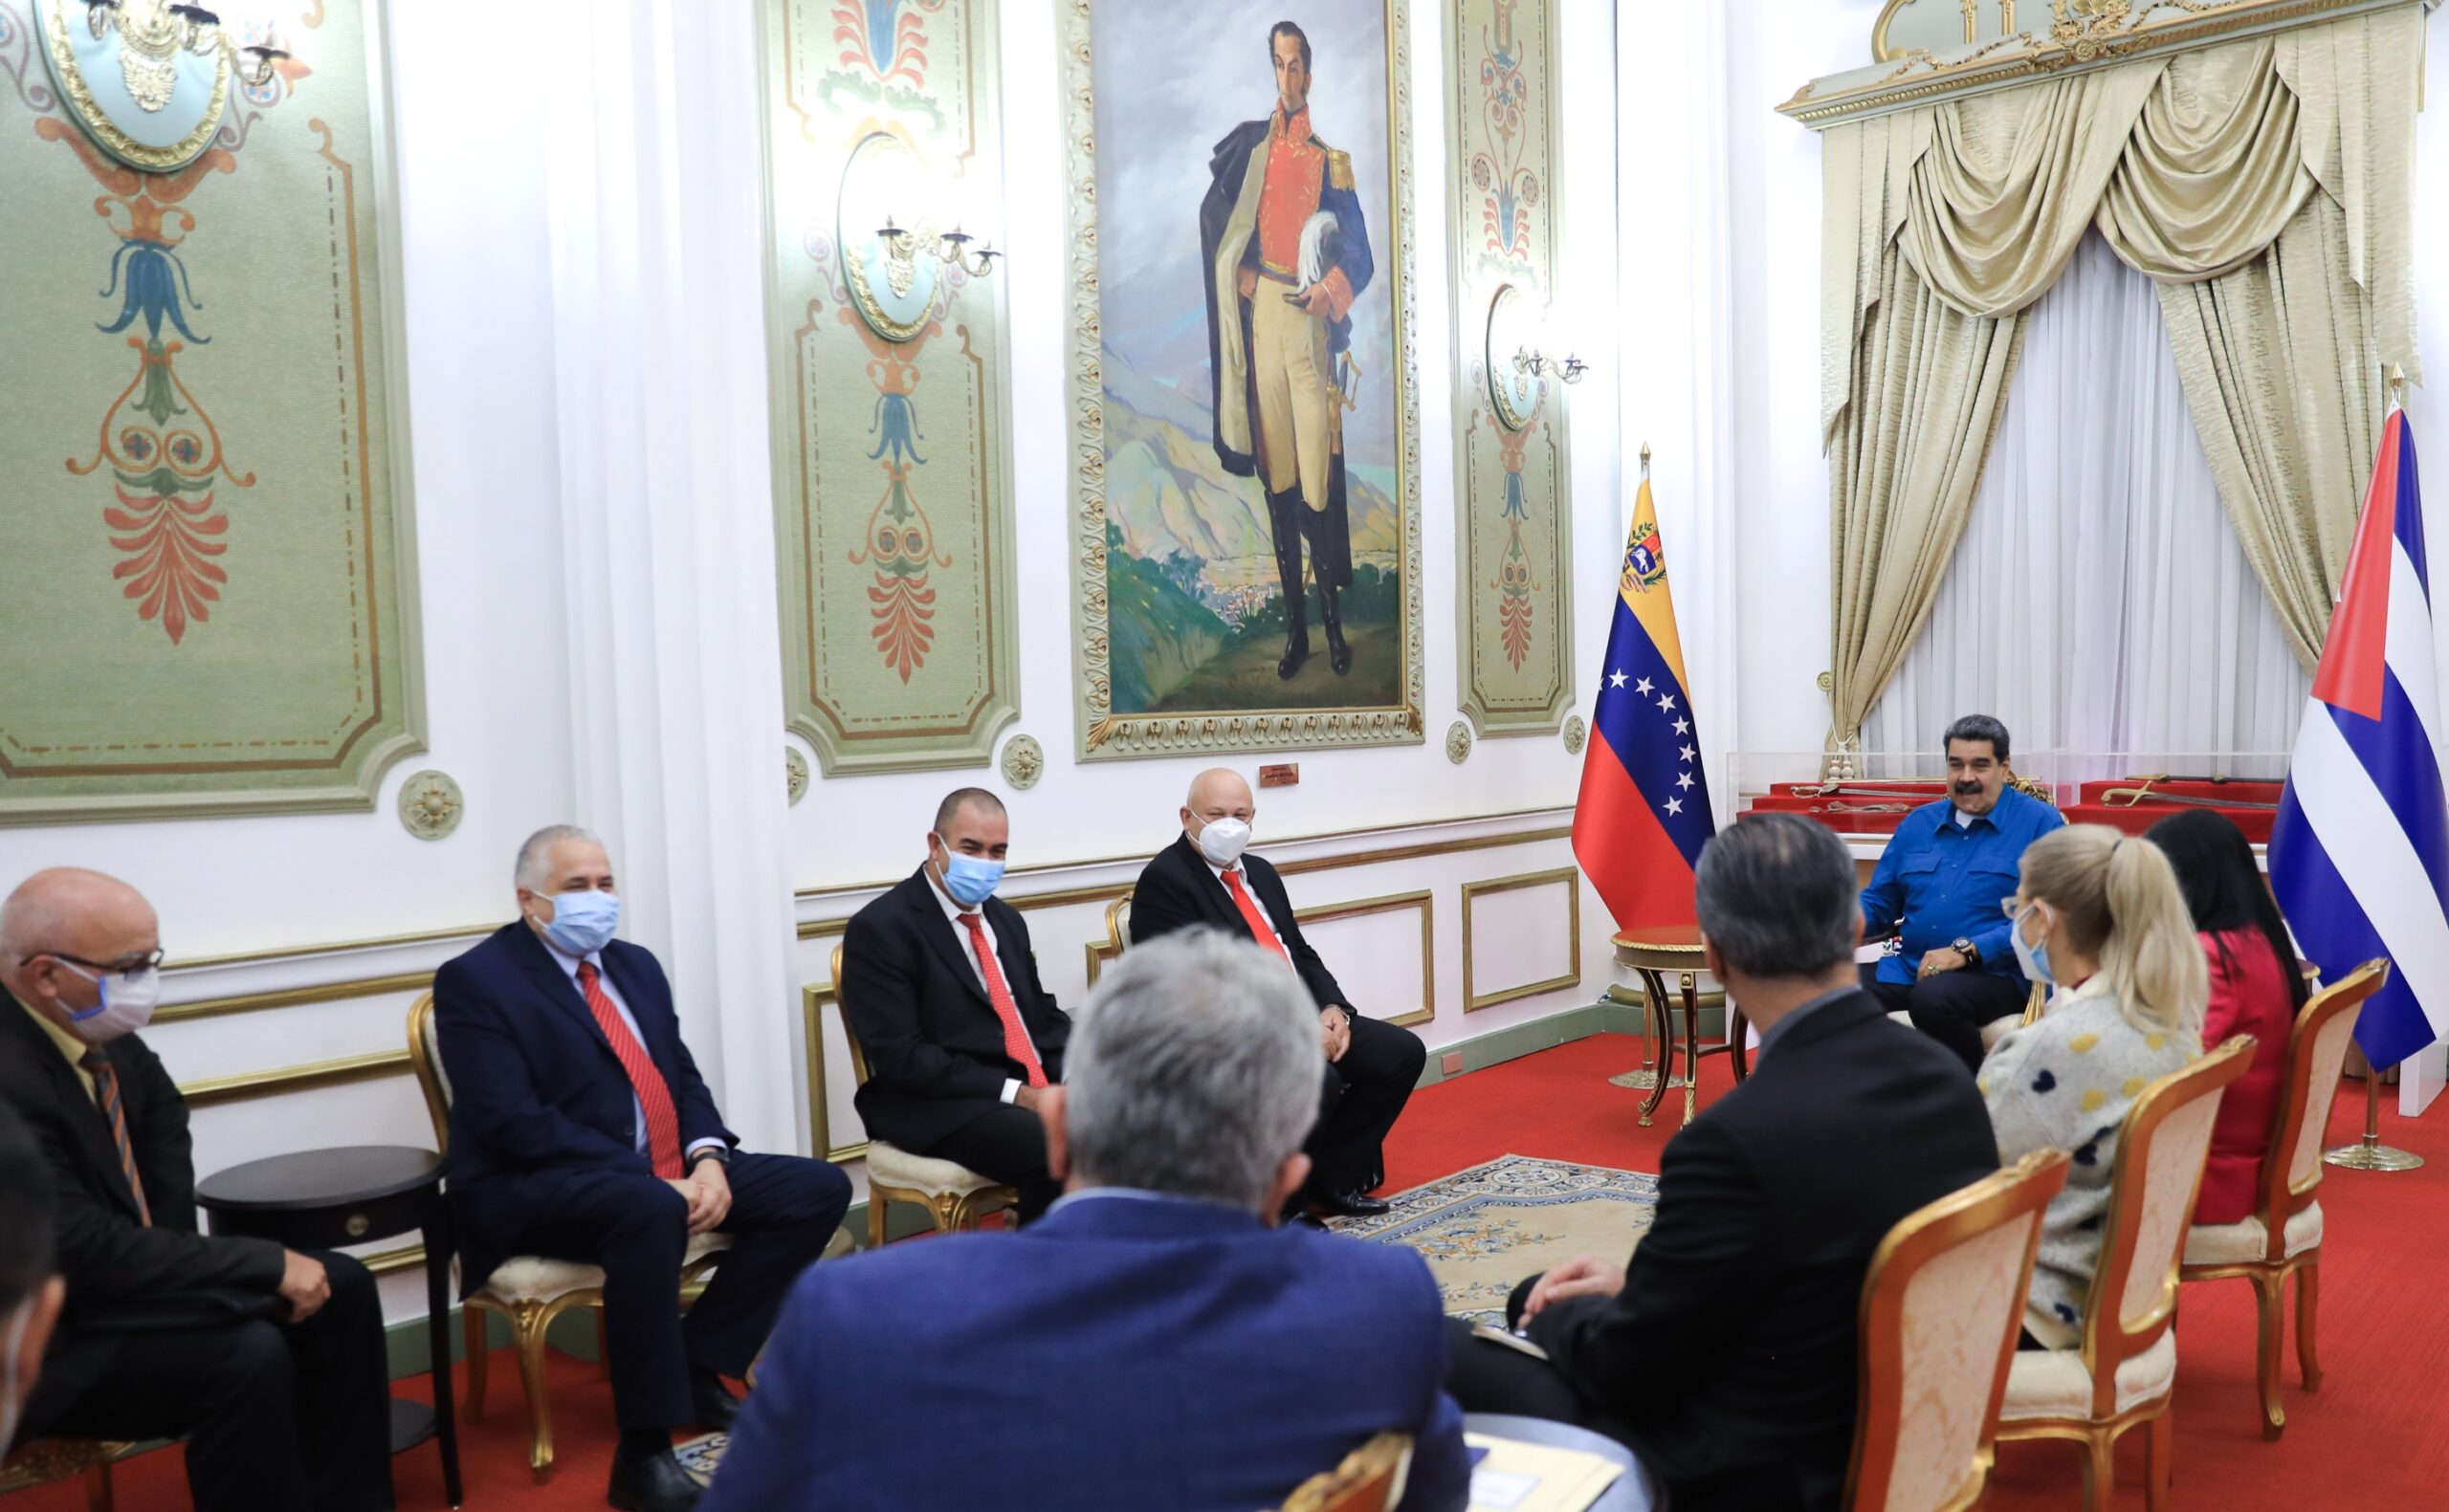 President Maduro welcomes Republic of Cuba’s special delegation in Miraflores Palace